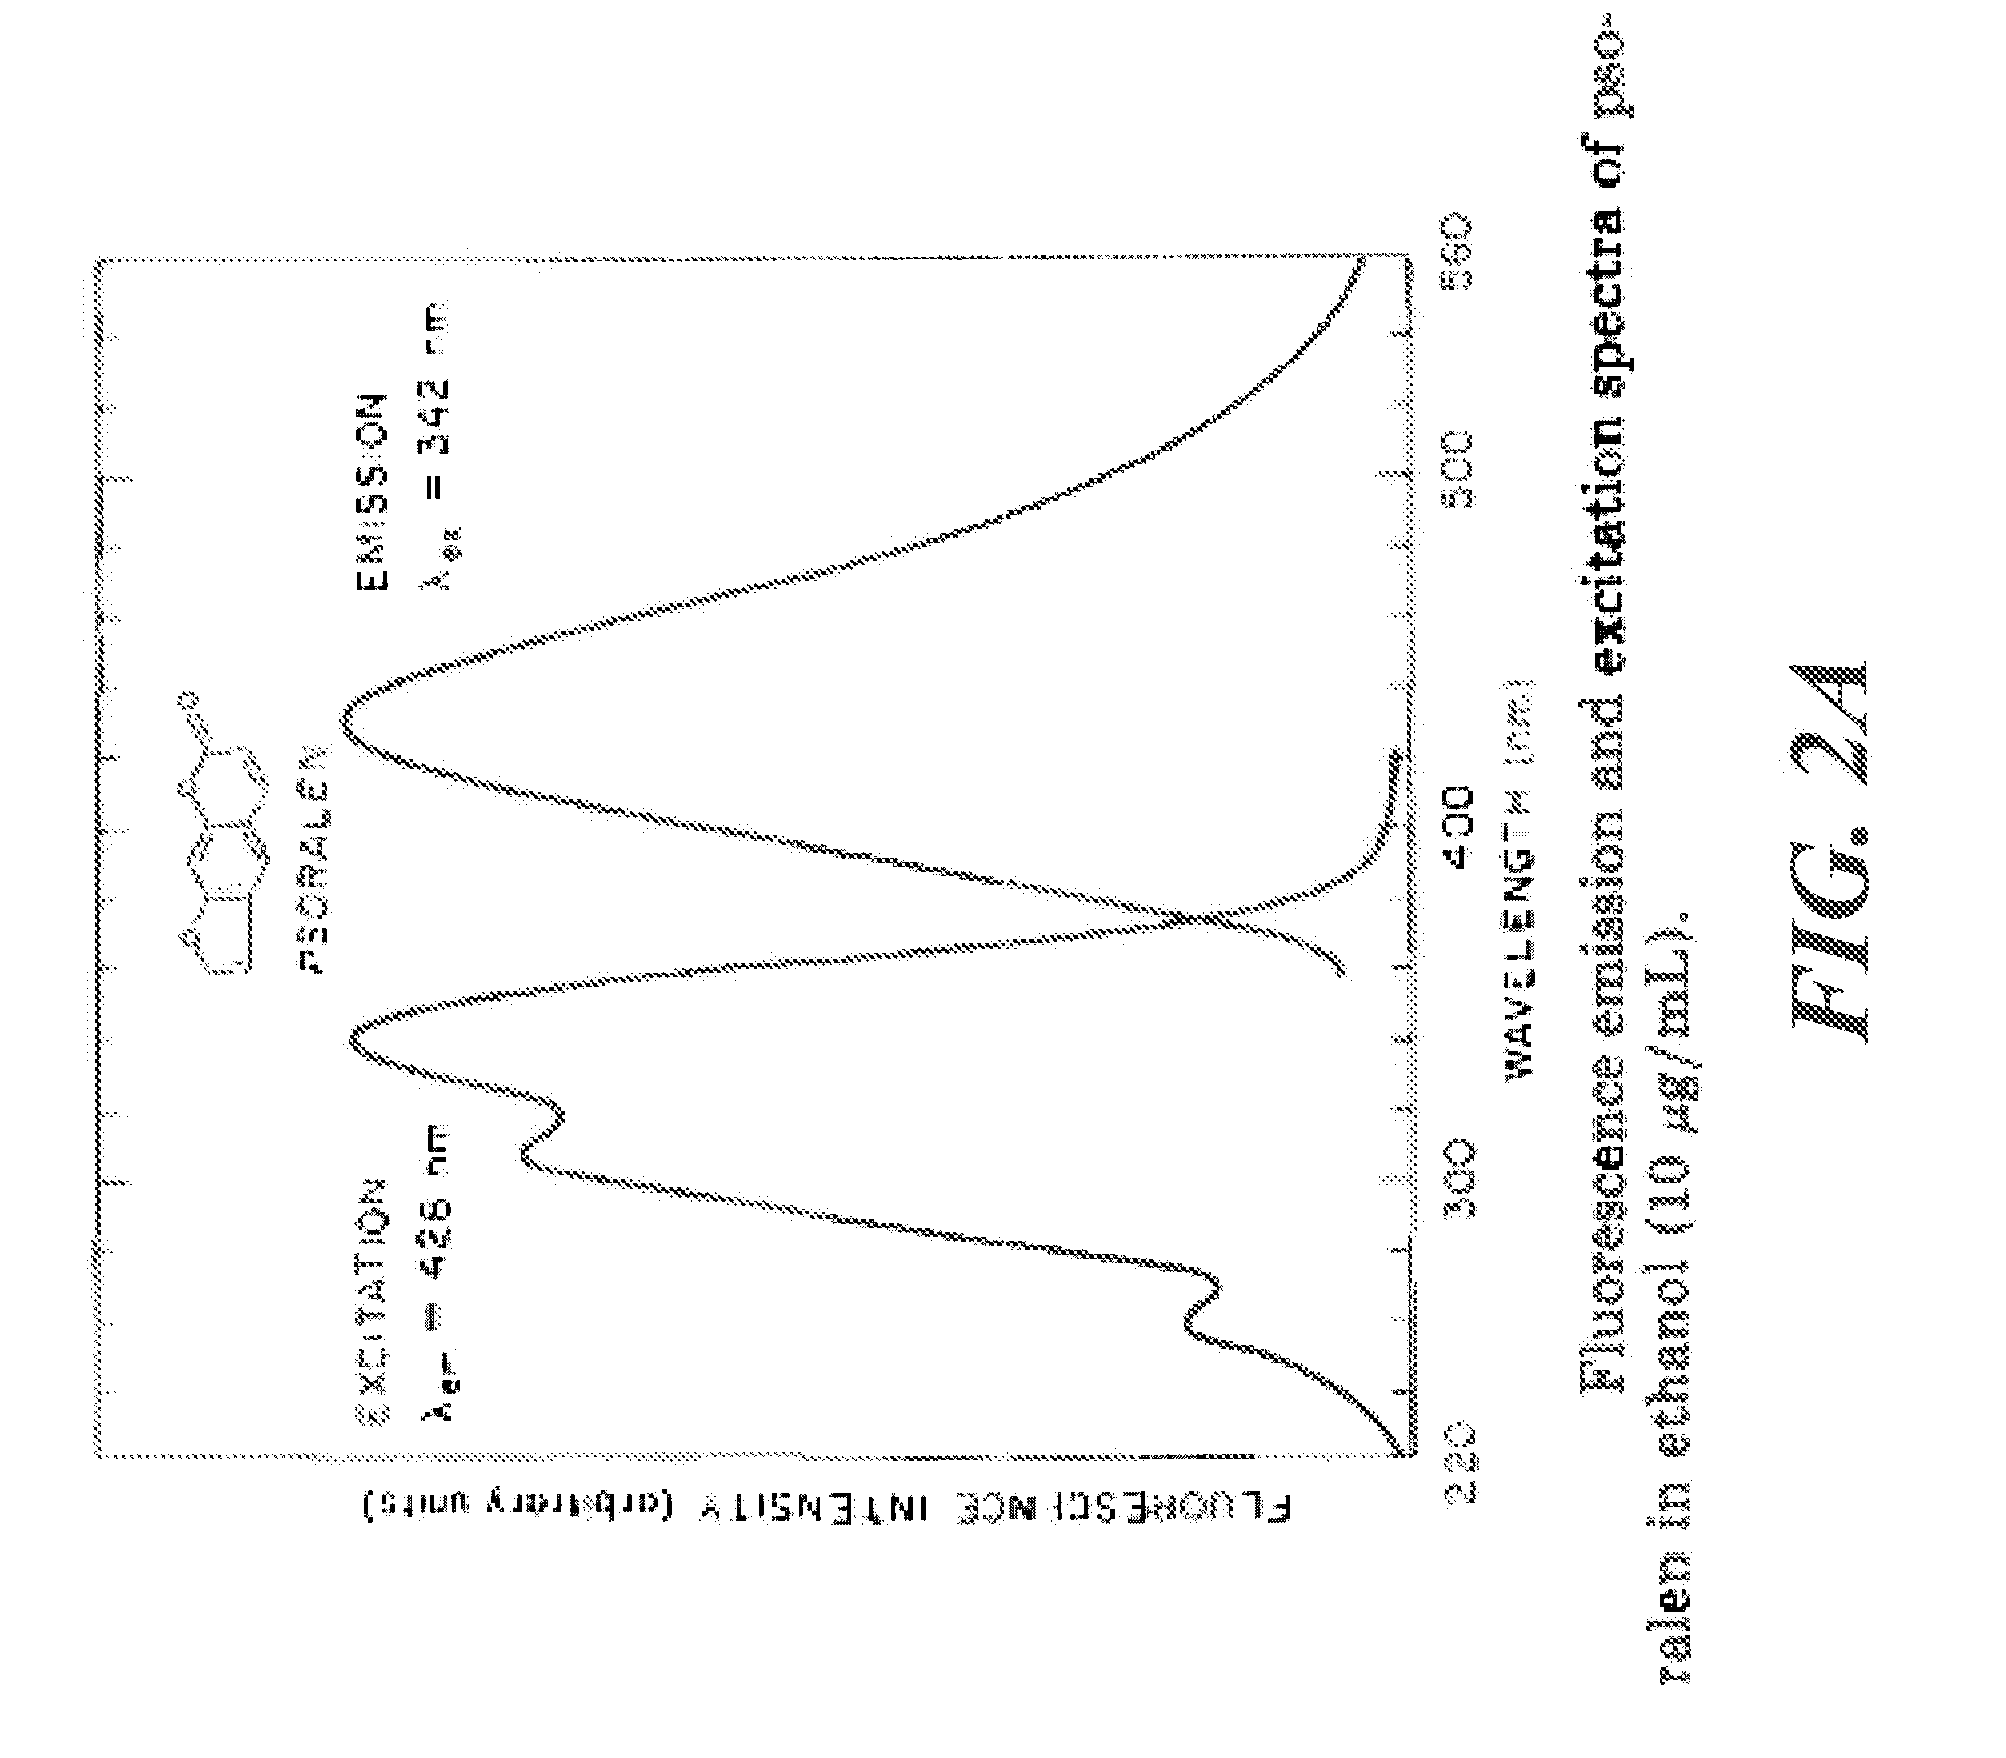 Functionalized metal-coated energy converting nanoparticles, methods for production thereof and methods for use